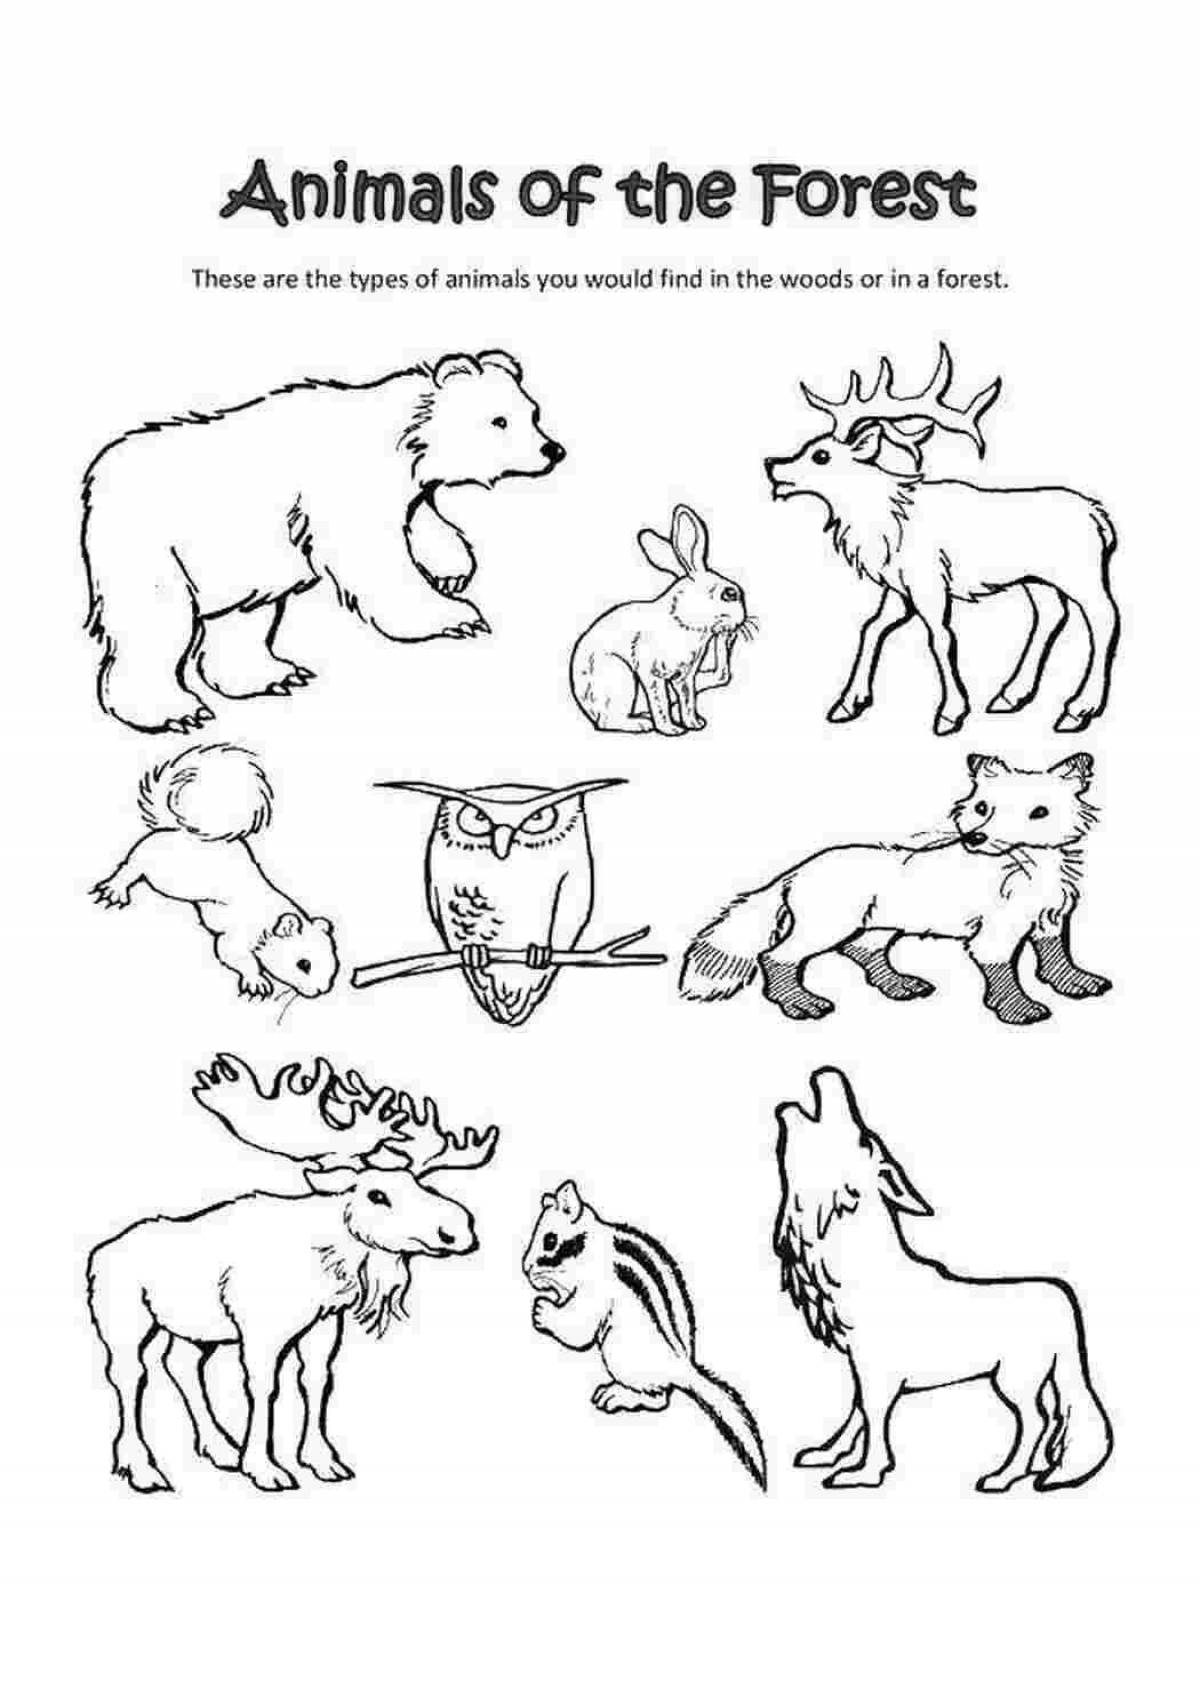 Dazzling Russian animals coloring pages for kids